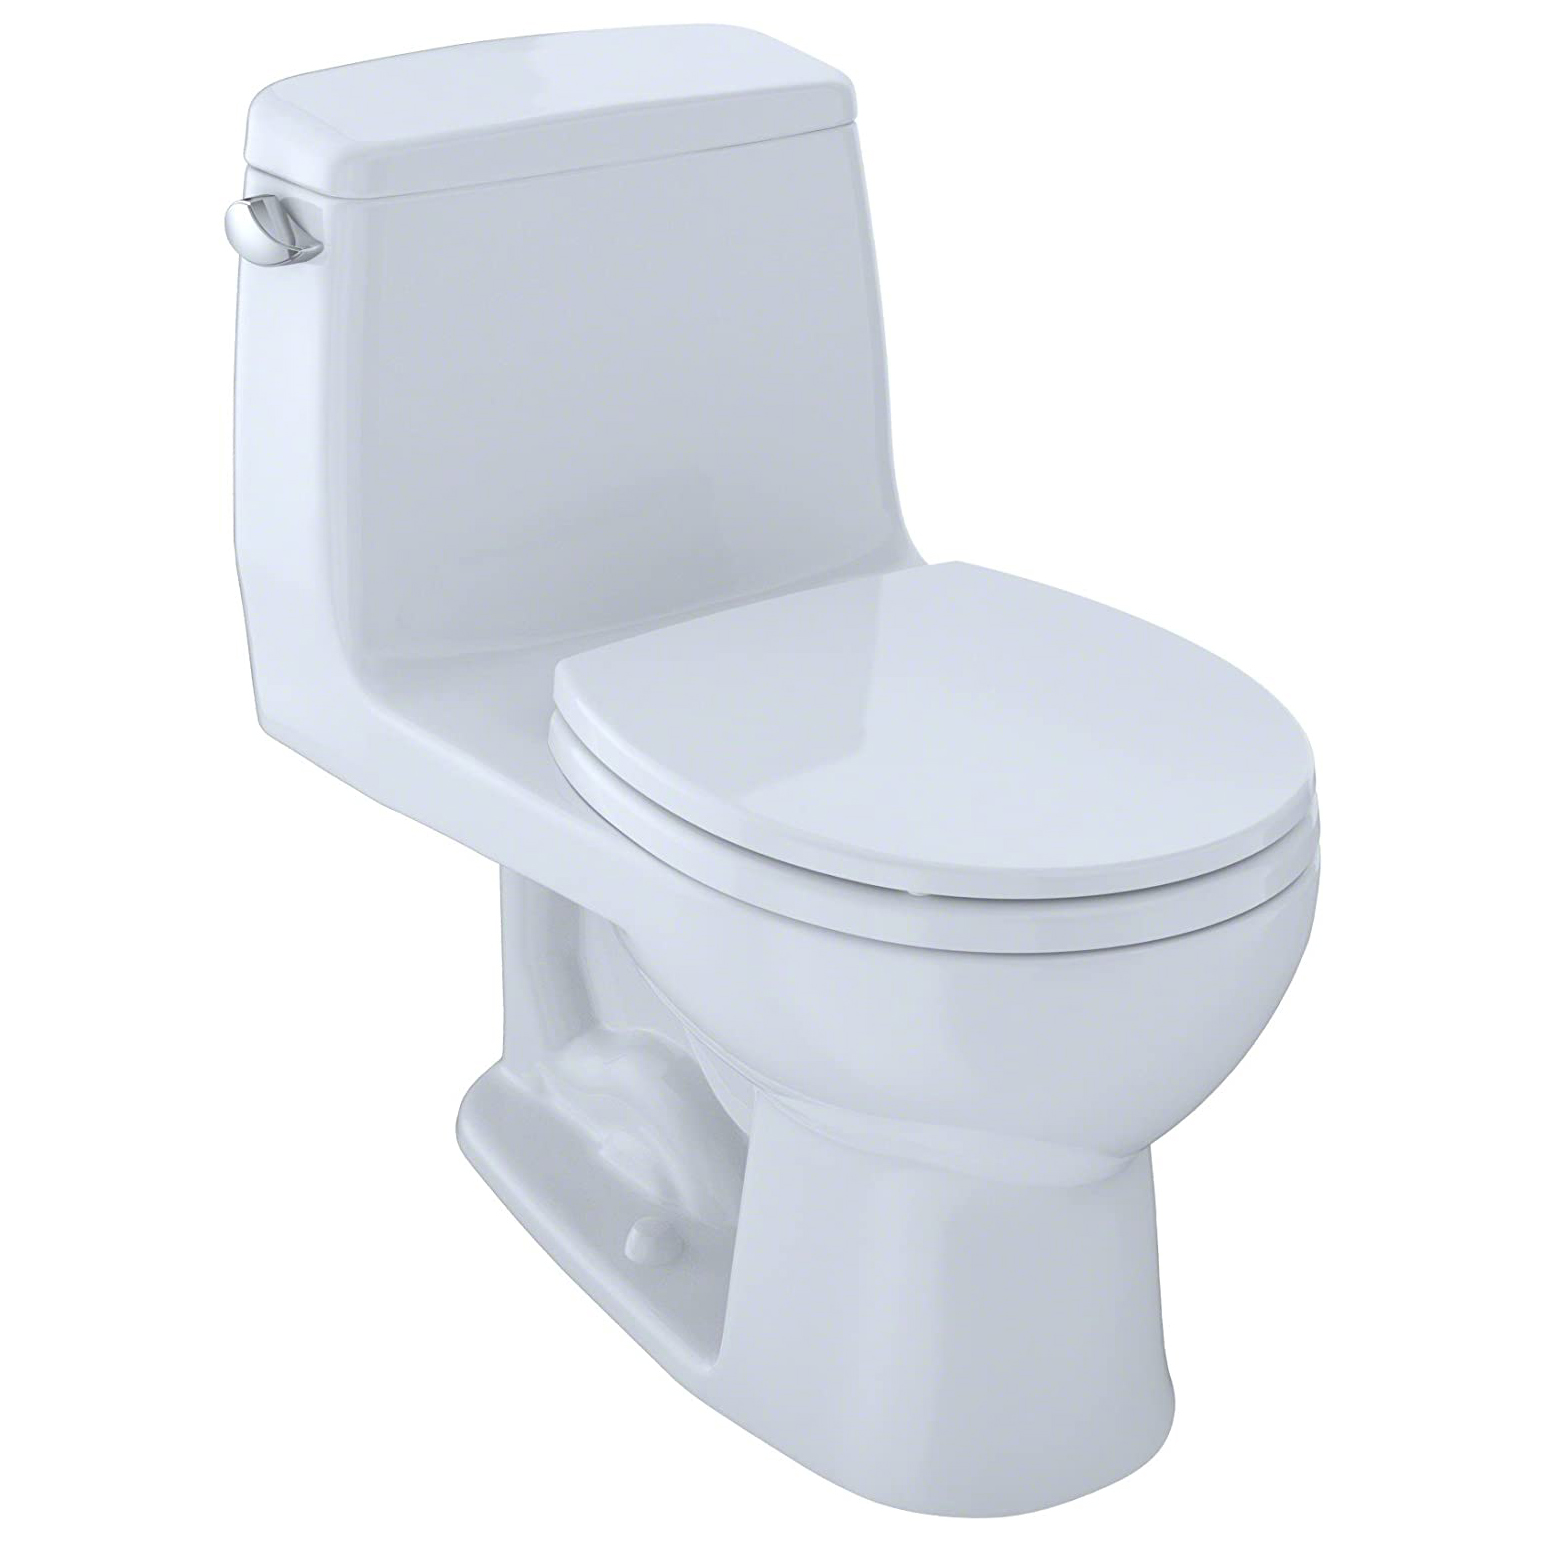 Ultramax 1-pc Round Front Toilet w/Seat in Cotton White 1.6 gpf